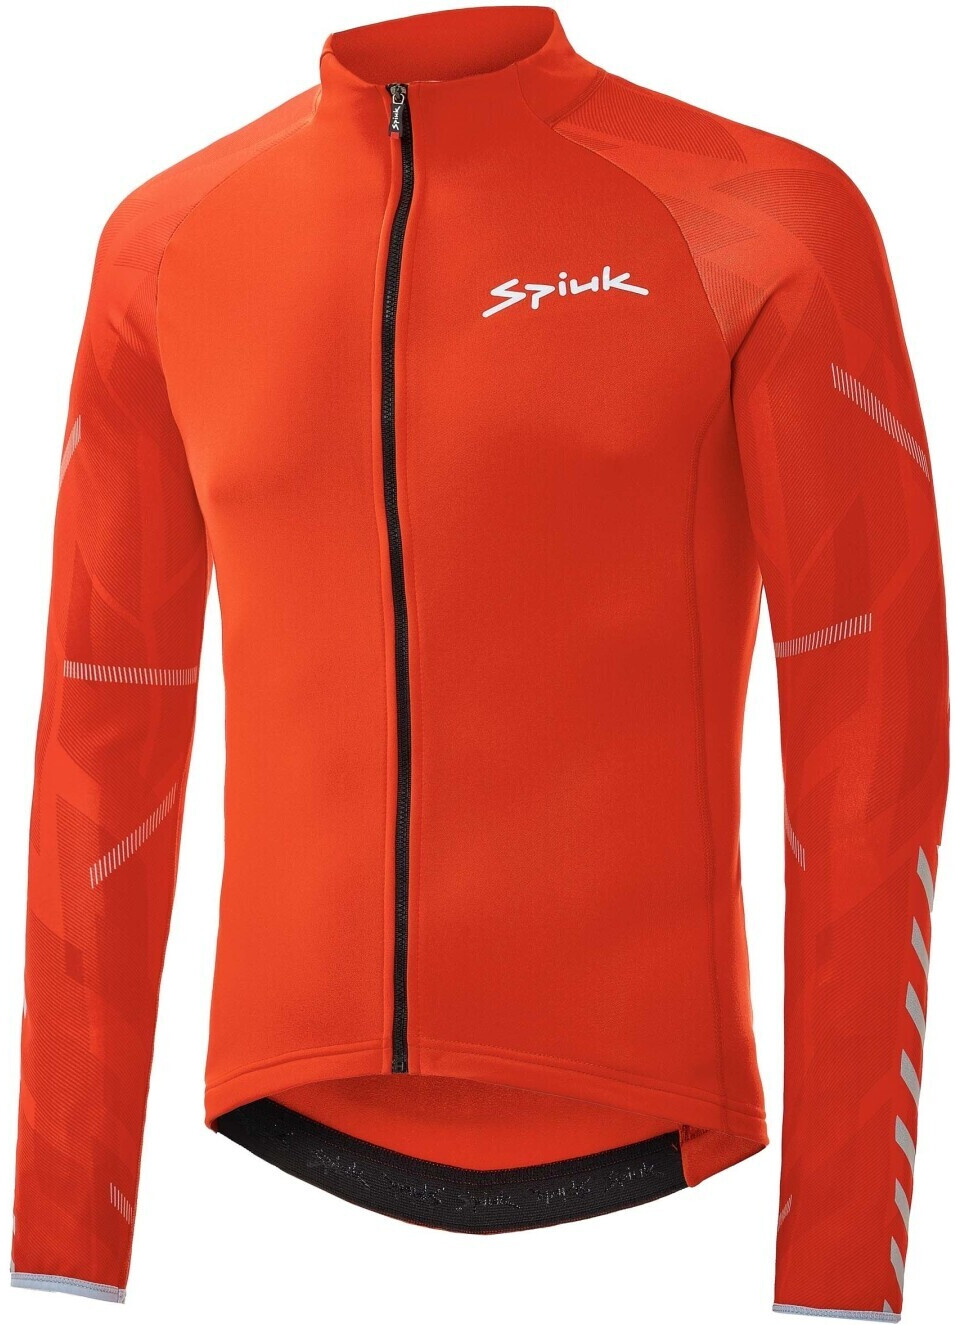 Spiuk Top Ten Star - Marino - Maillot Ciclismo Hombre